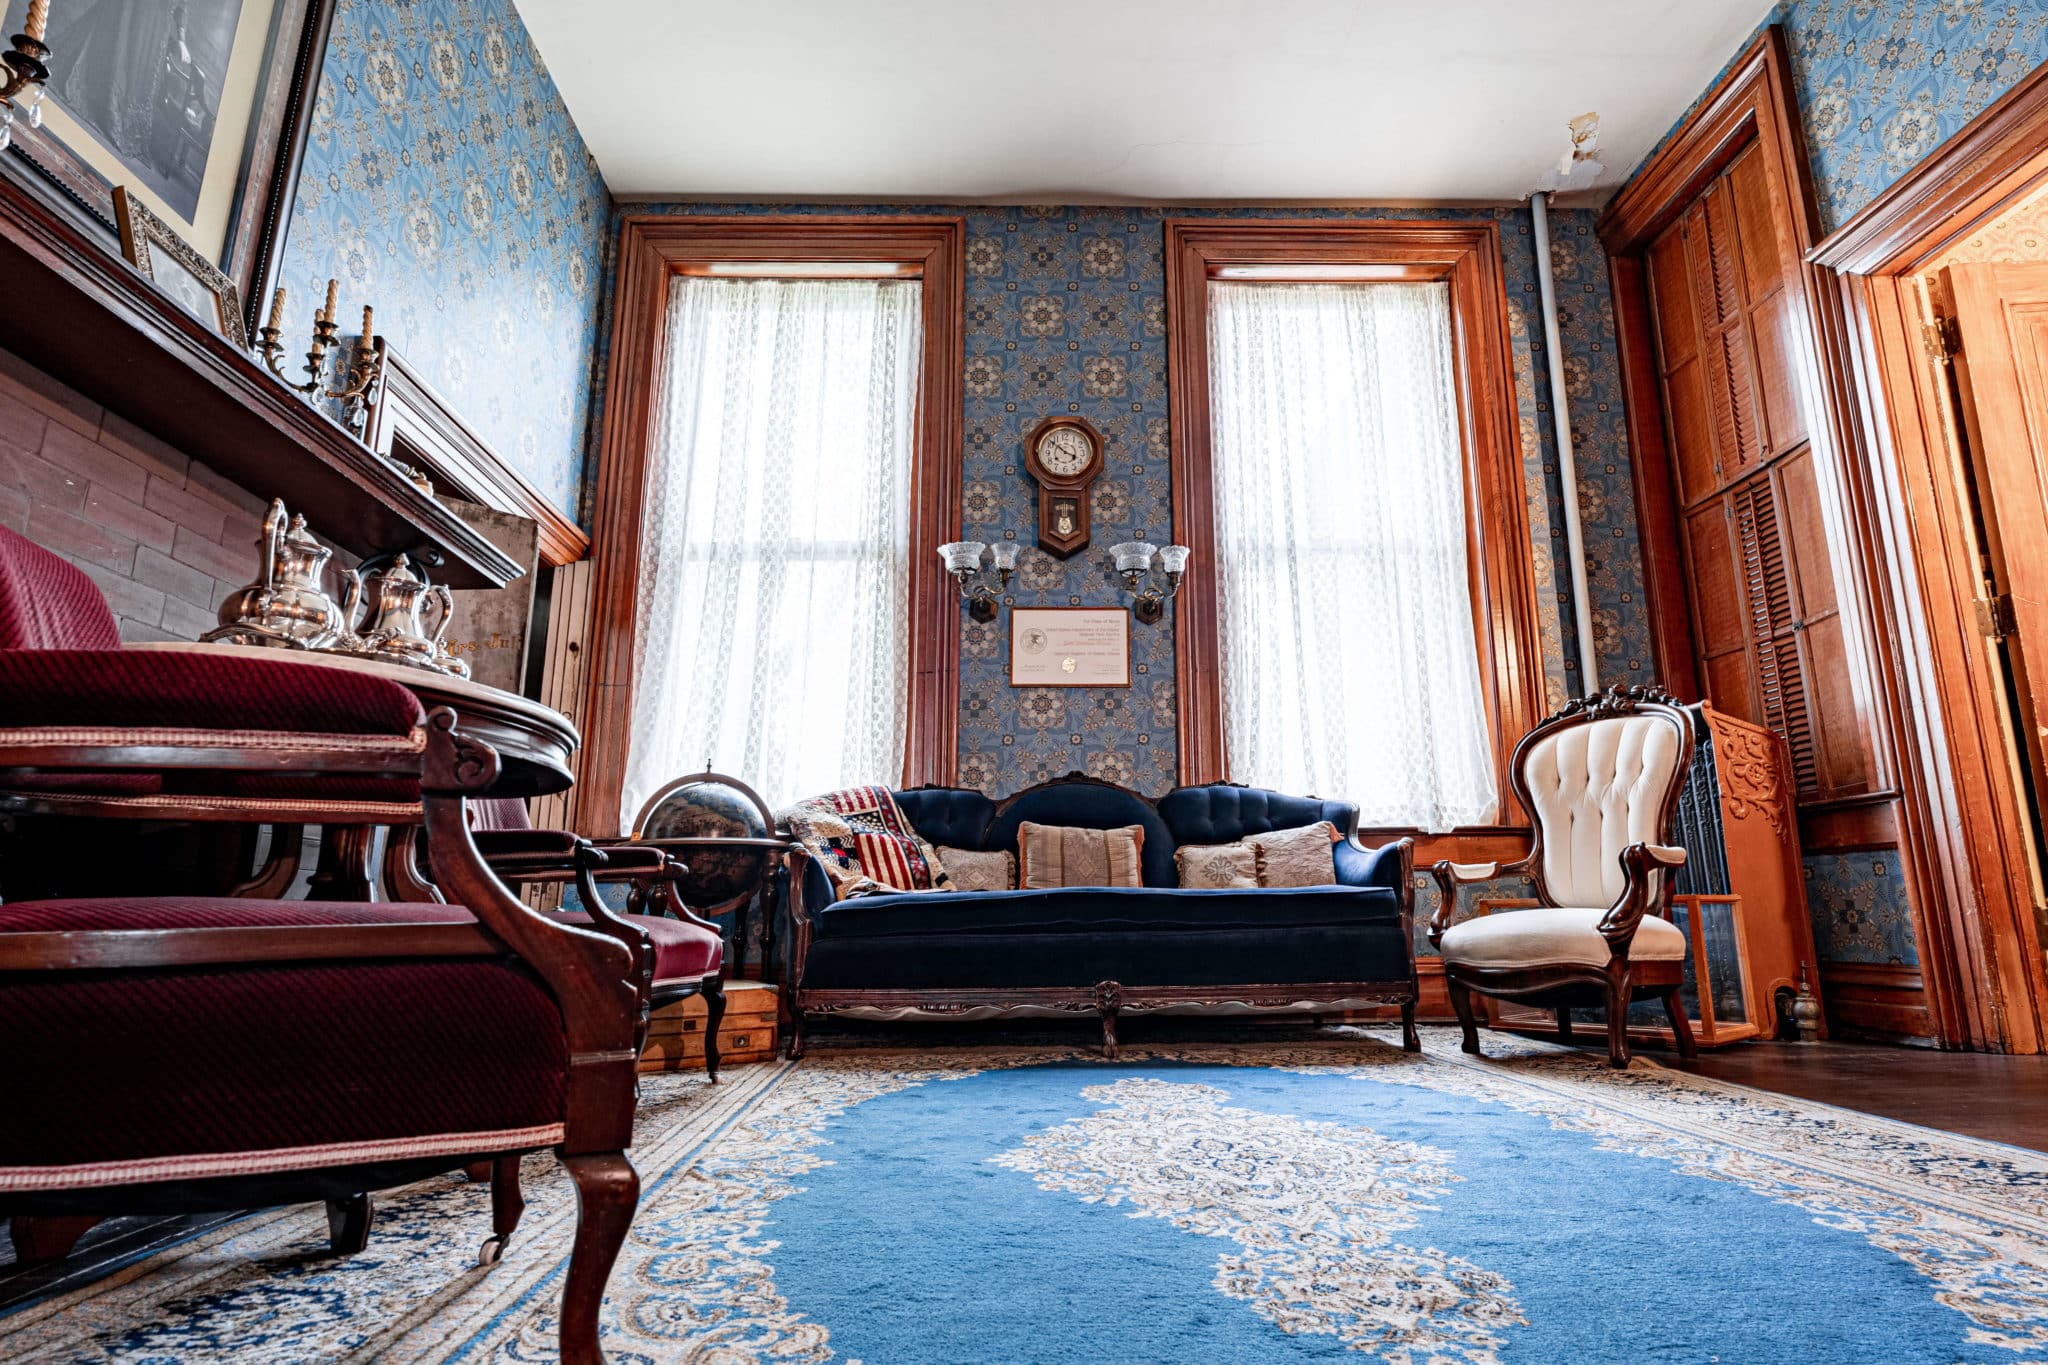 wide angle view of the Safe Room with a vibrant blue rug and couch